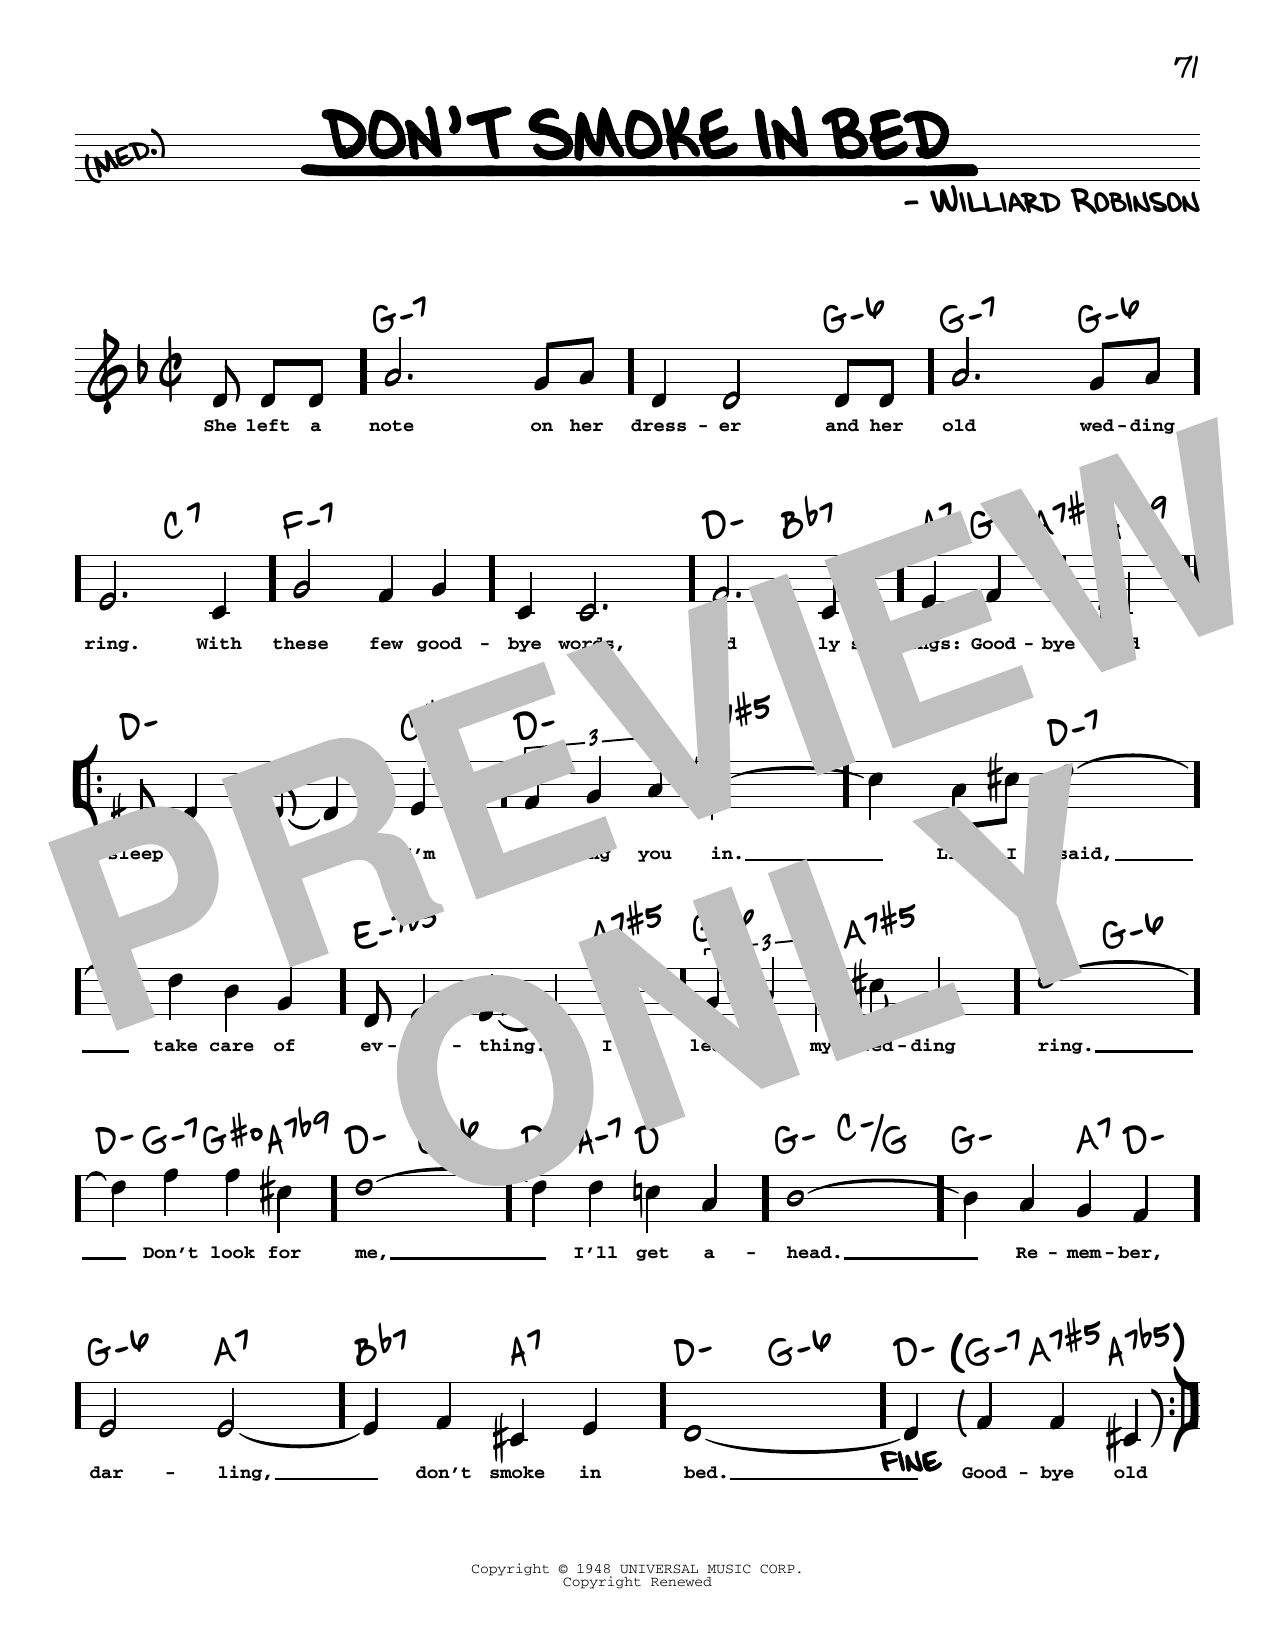 Download Williard Robinson Don't Smoke In Bed (High Voice) Sheet Music